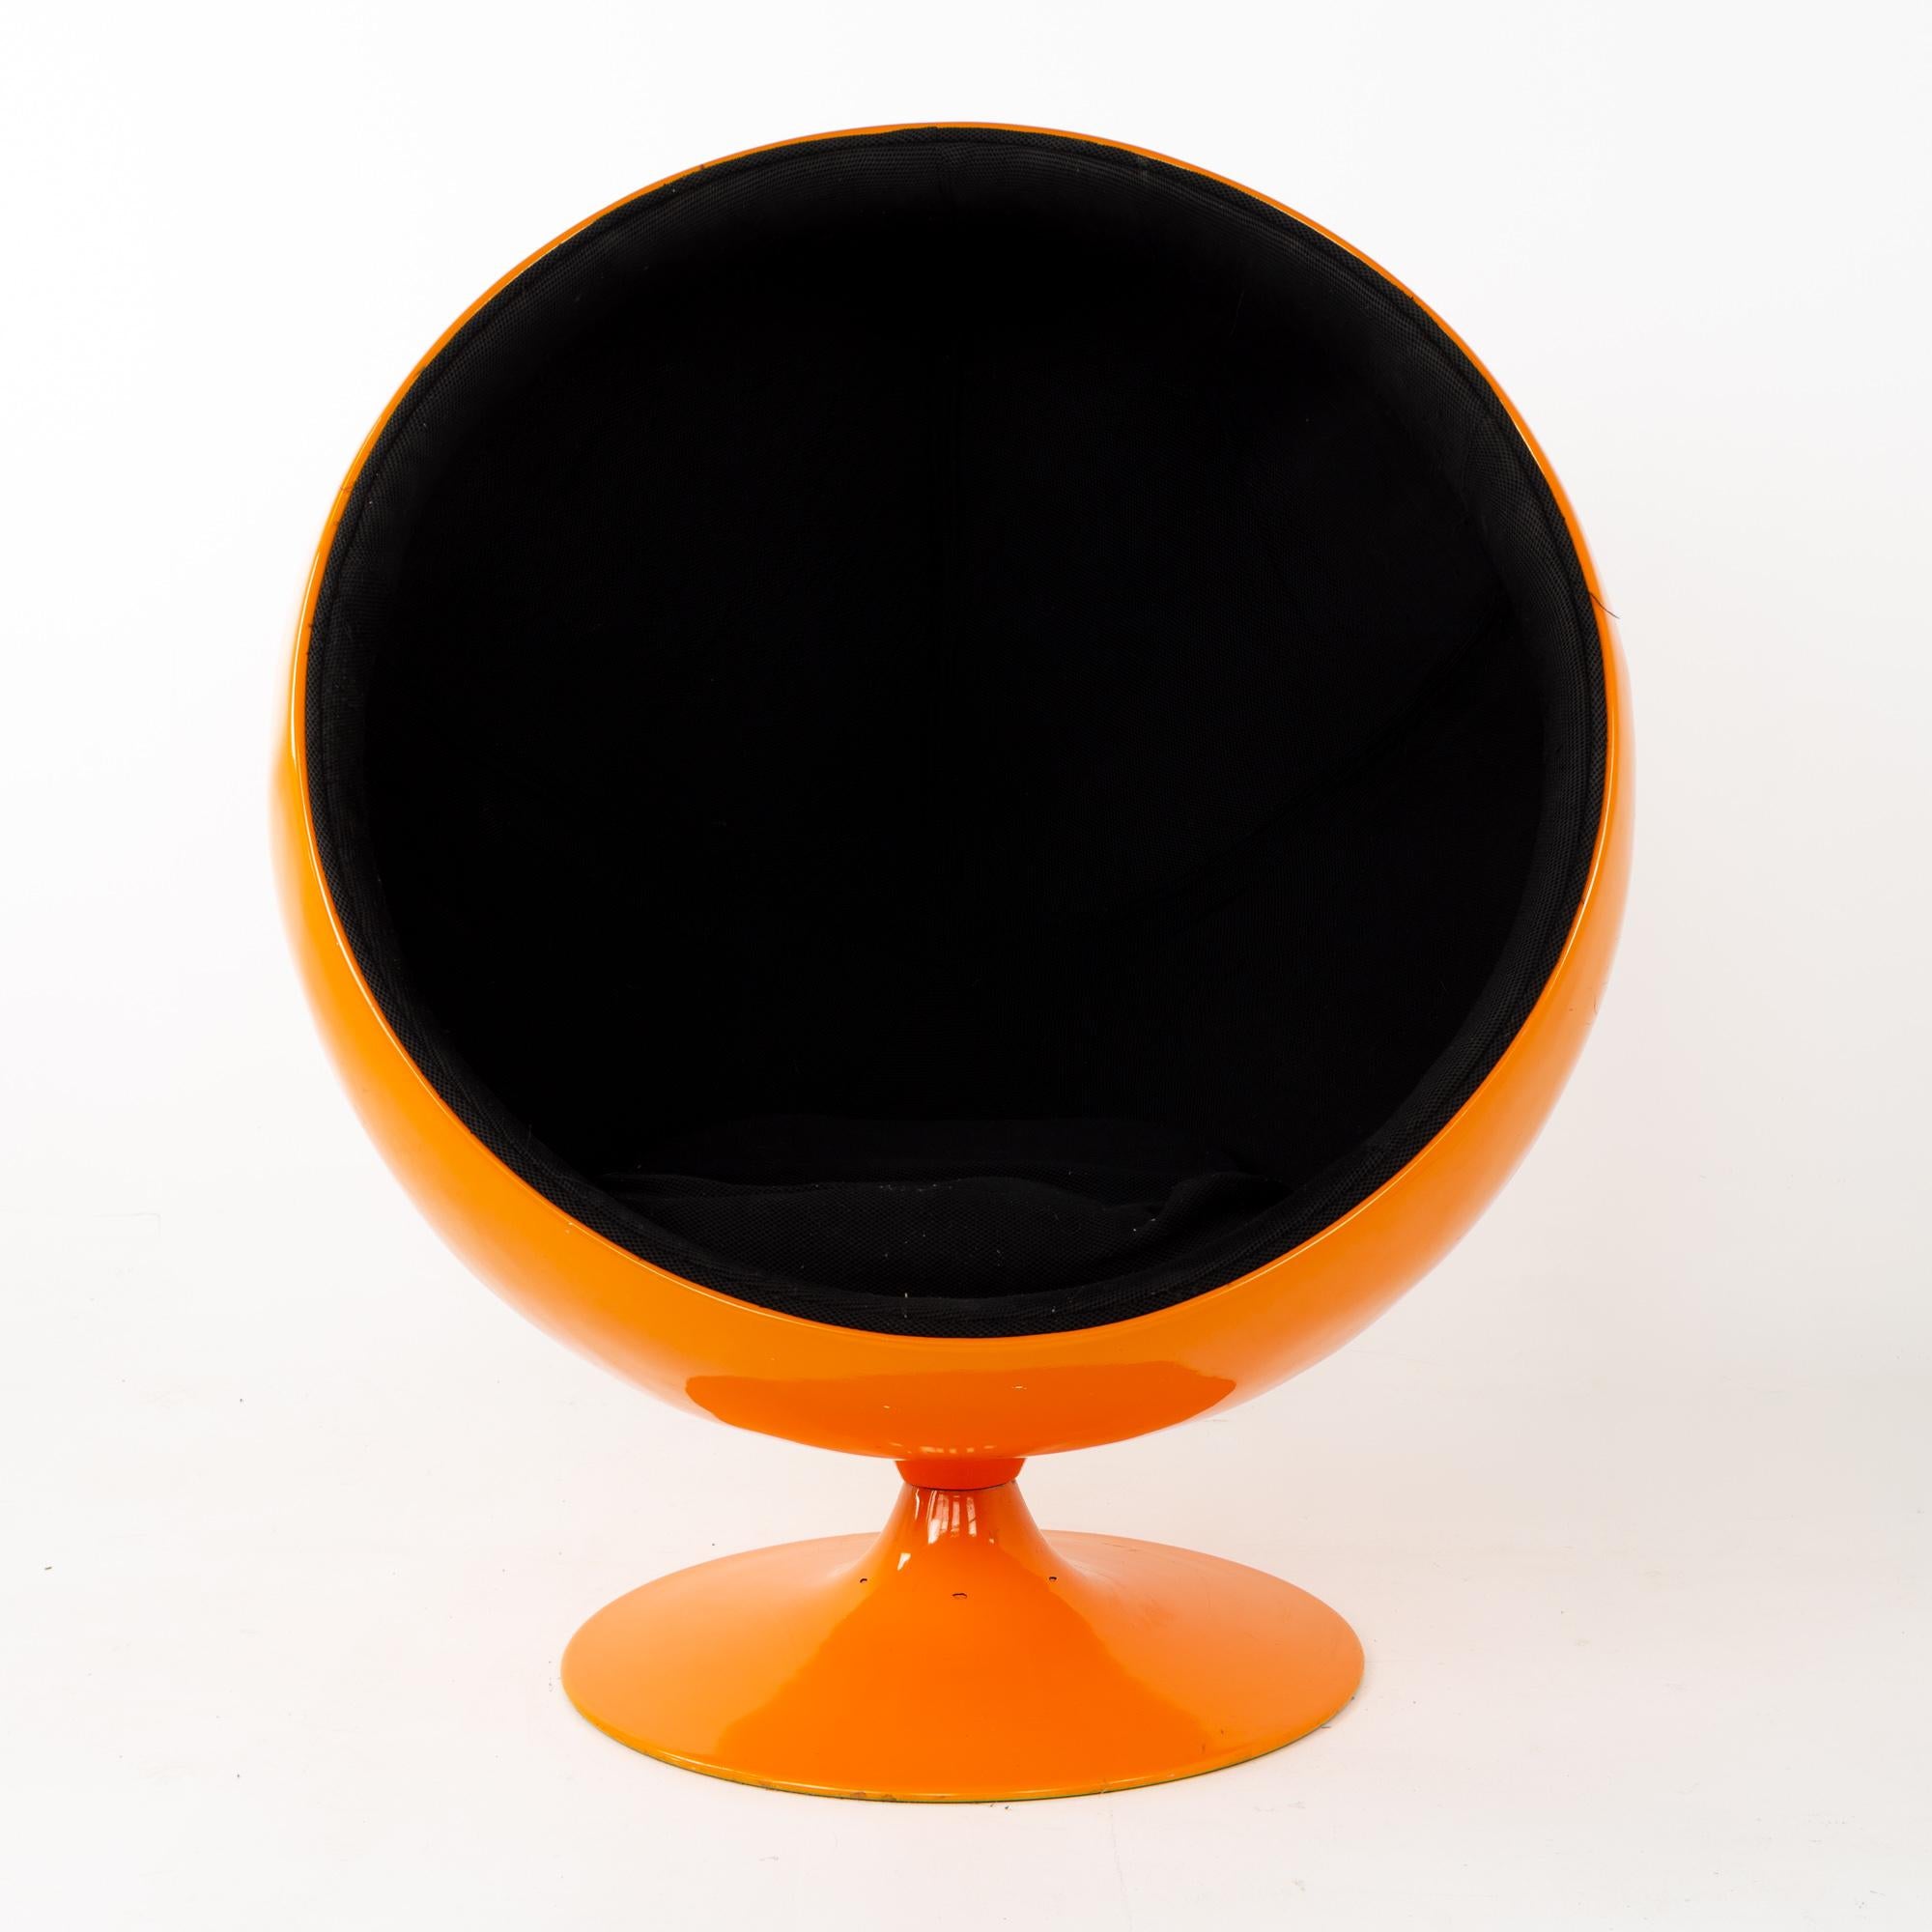 Eero Aarnio style midcentury orange ball chair
This chair is 39.5 wide x 32.25 deep x 48 inches high, with a seat height of 17 inches

This piece is available in what we call restored vintage condition. Upon purchase it is thoroughly cleaned and